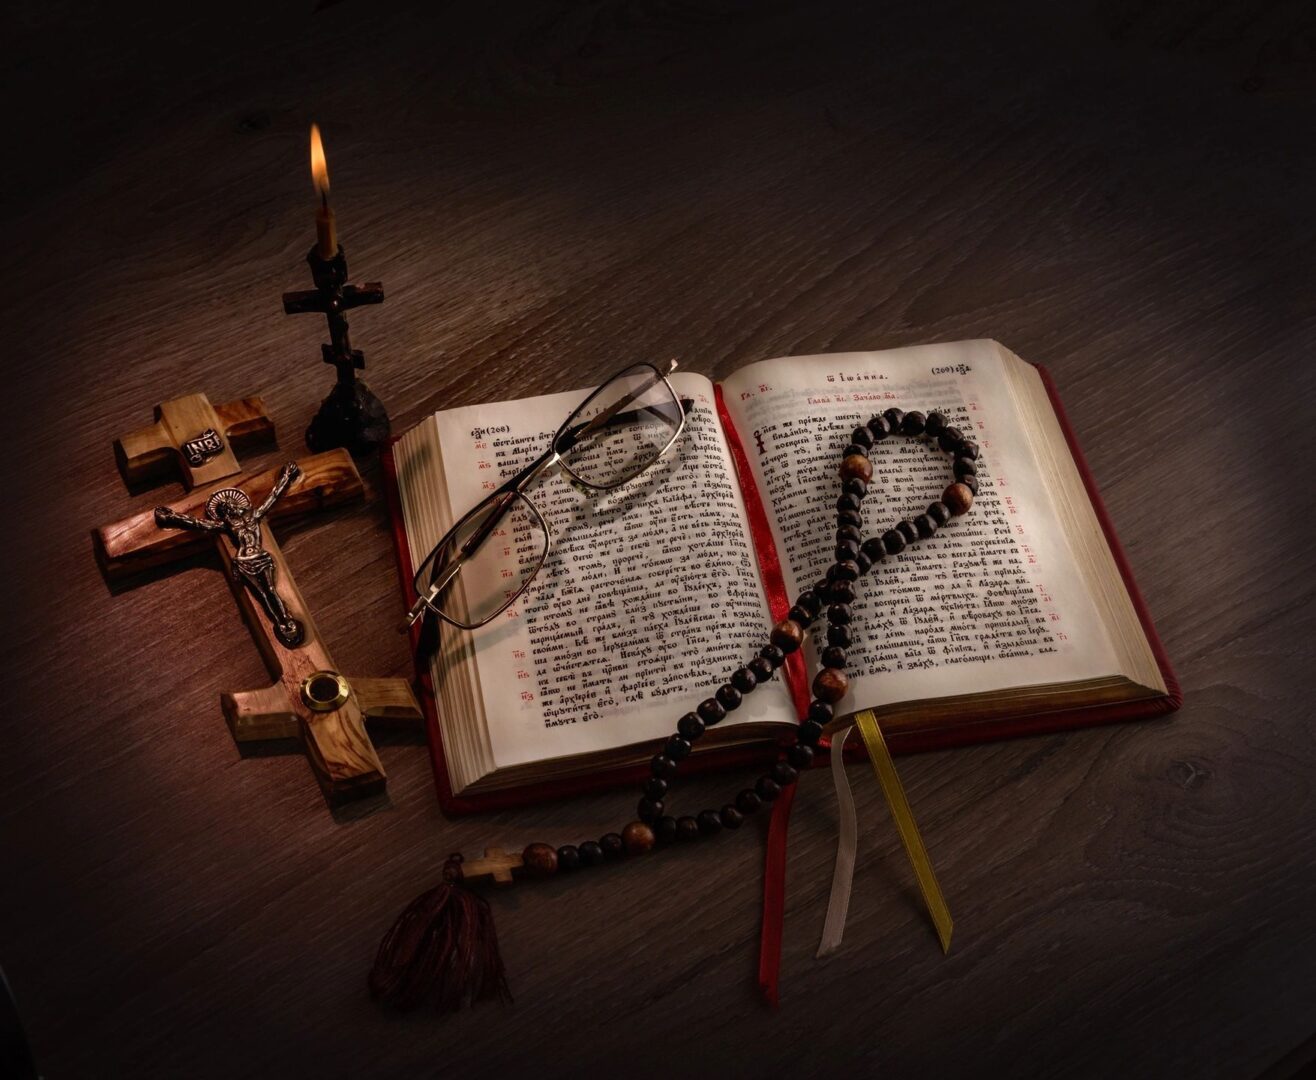 A book, rosary and a candle on a wooden table.